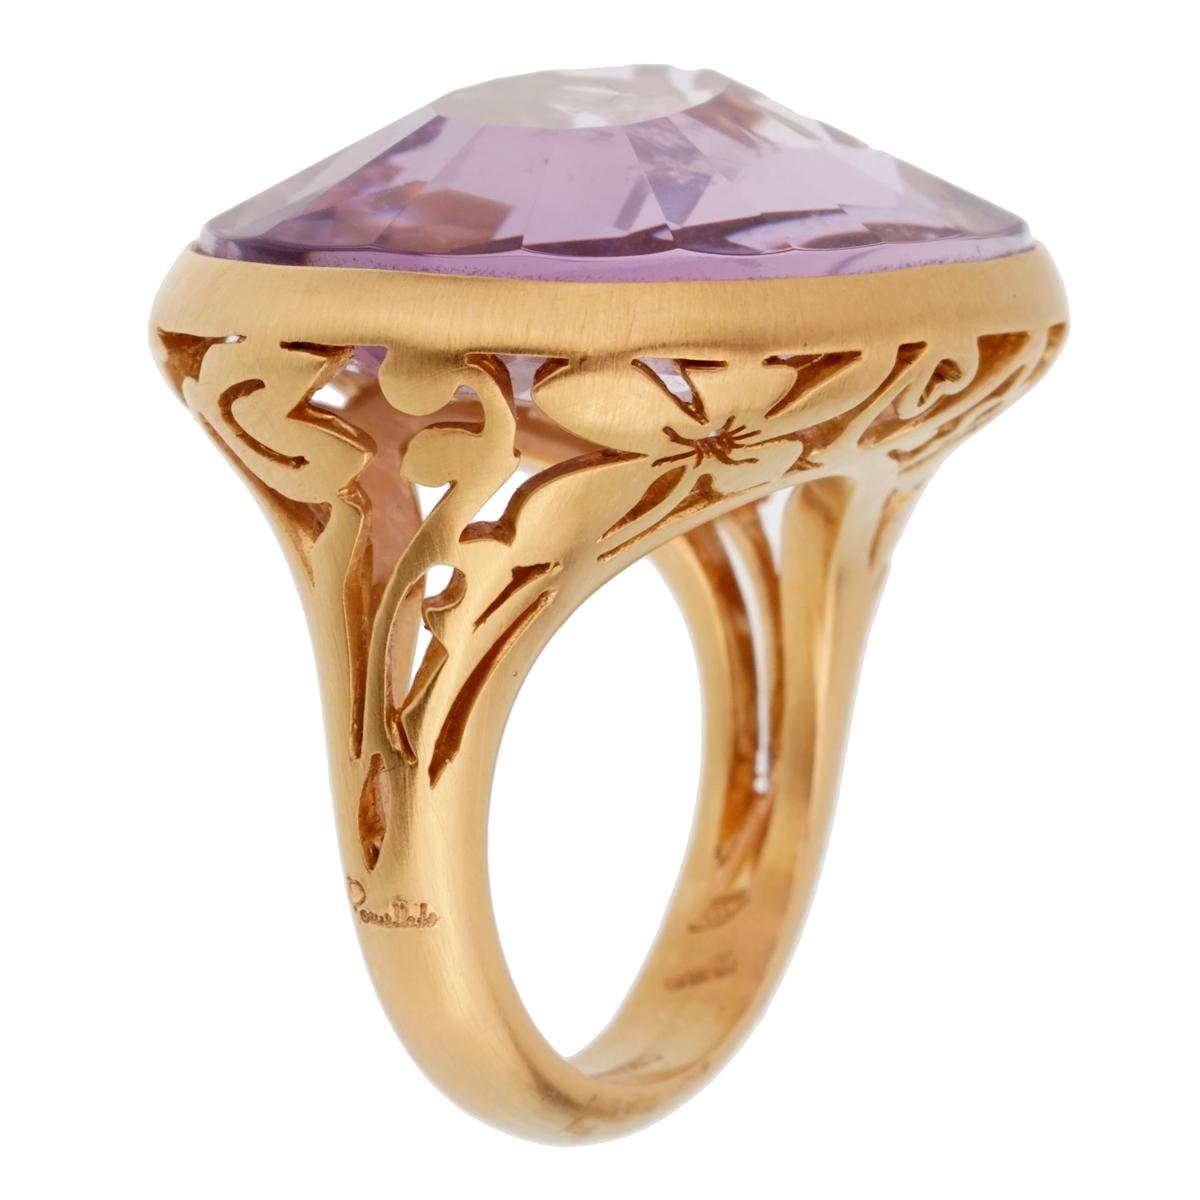 A chic brand new Pomellato cocktail ring showcasing a 10.19ct Amethyst set in 18k rose gold. The ring measures a size 6.25 and can be resized

Pomellato Retail: $5500
Sku: 2311